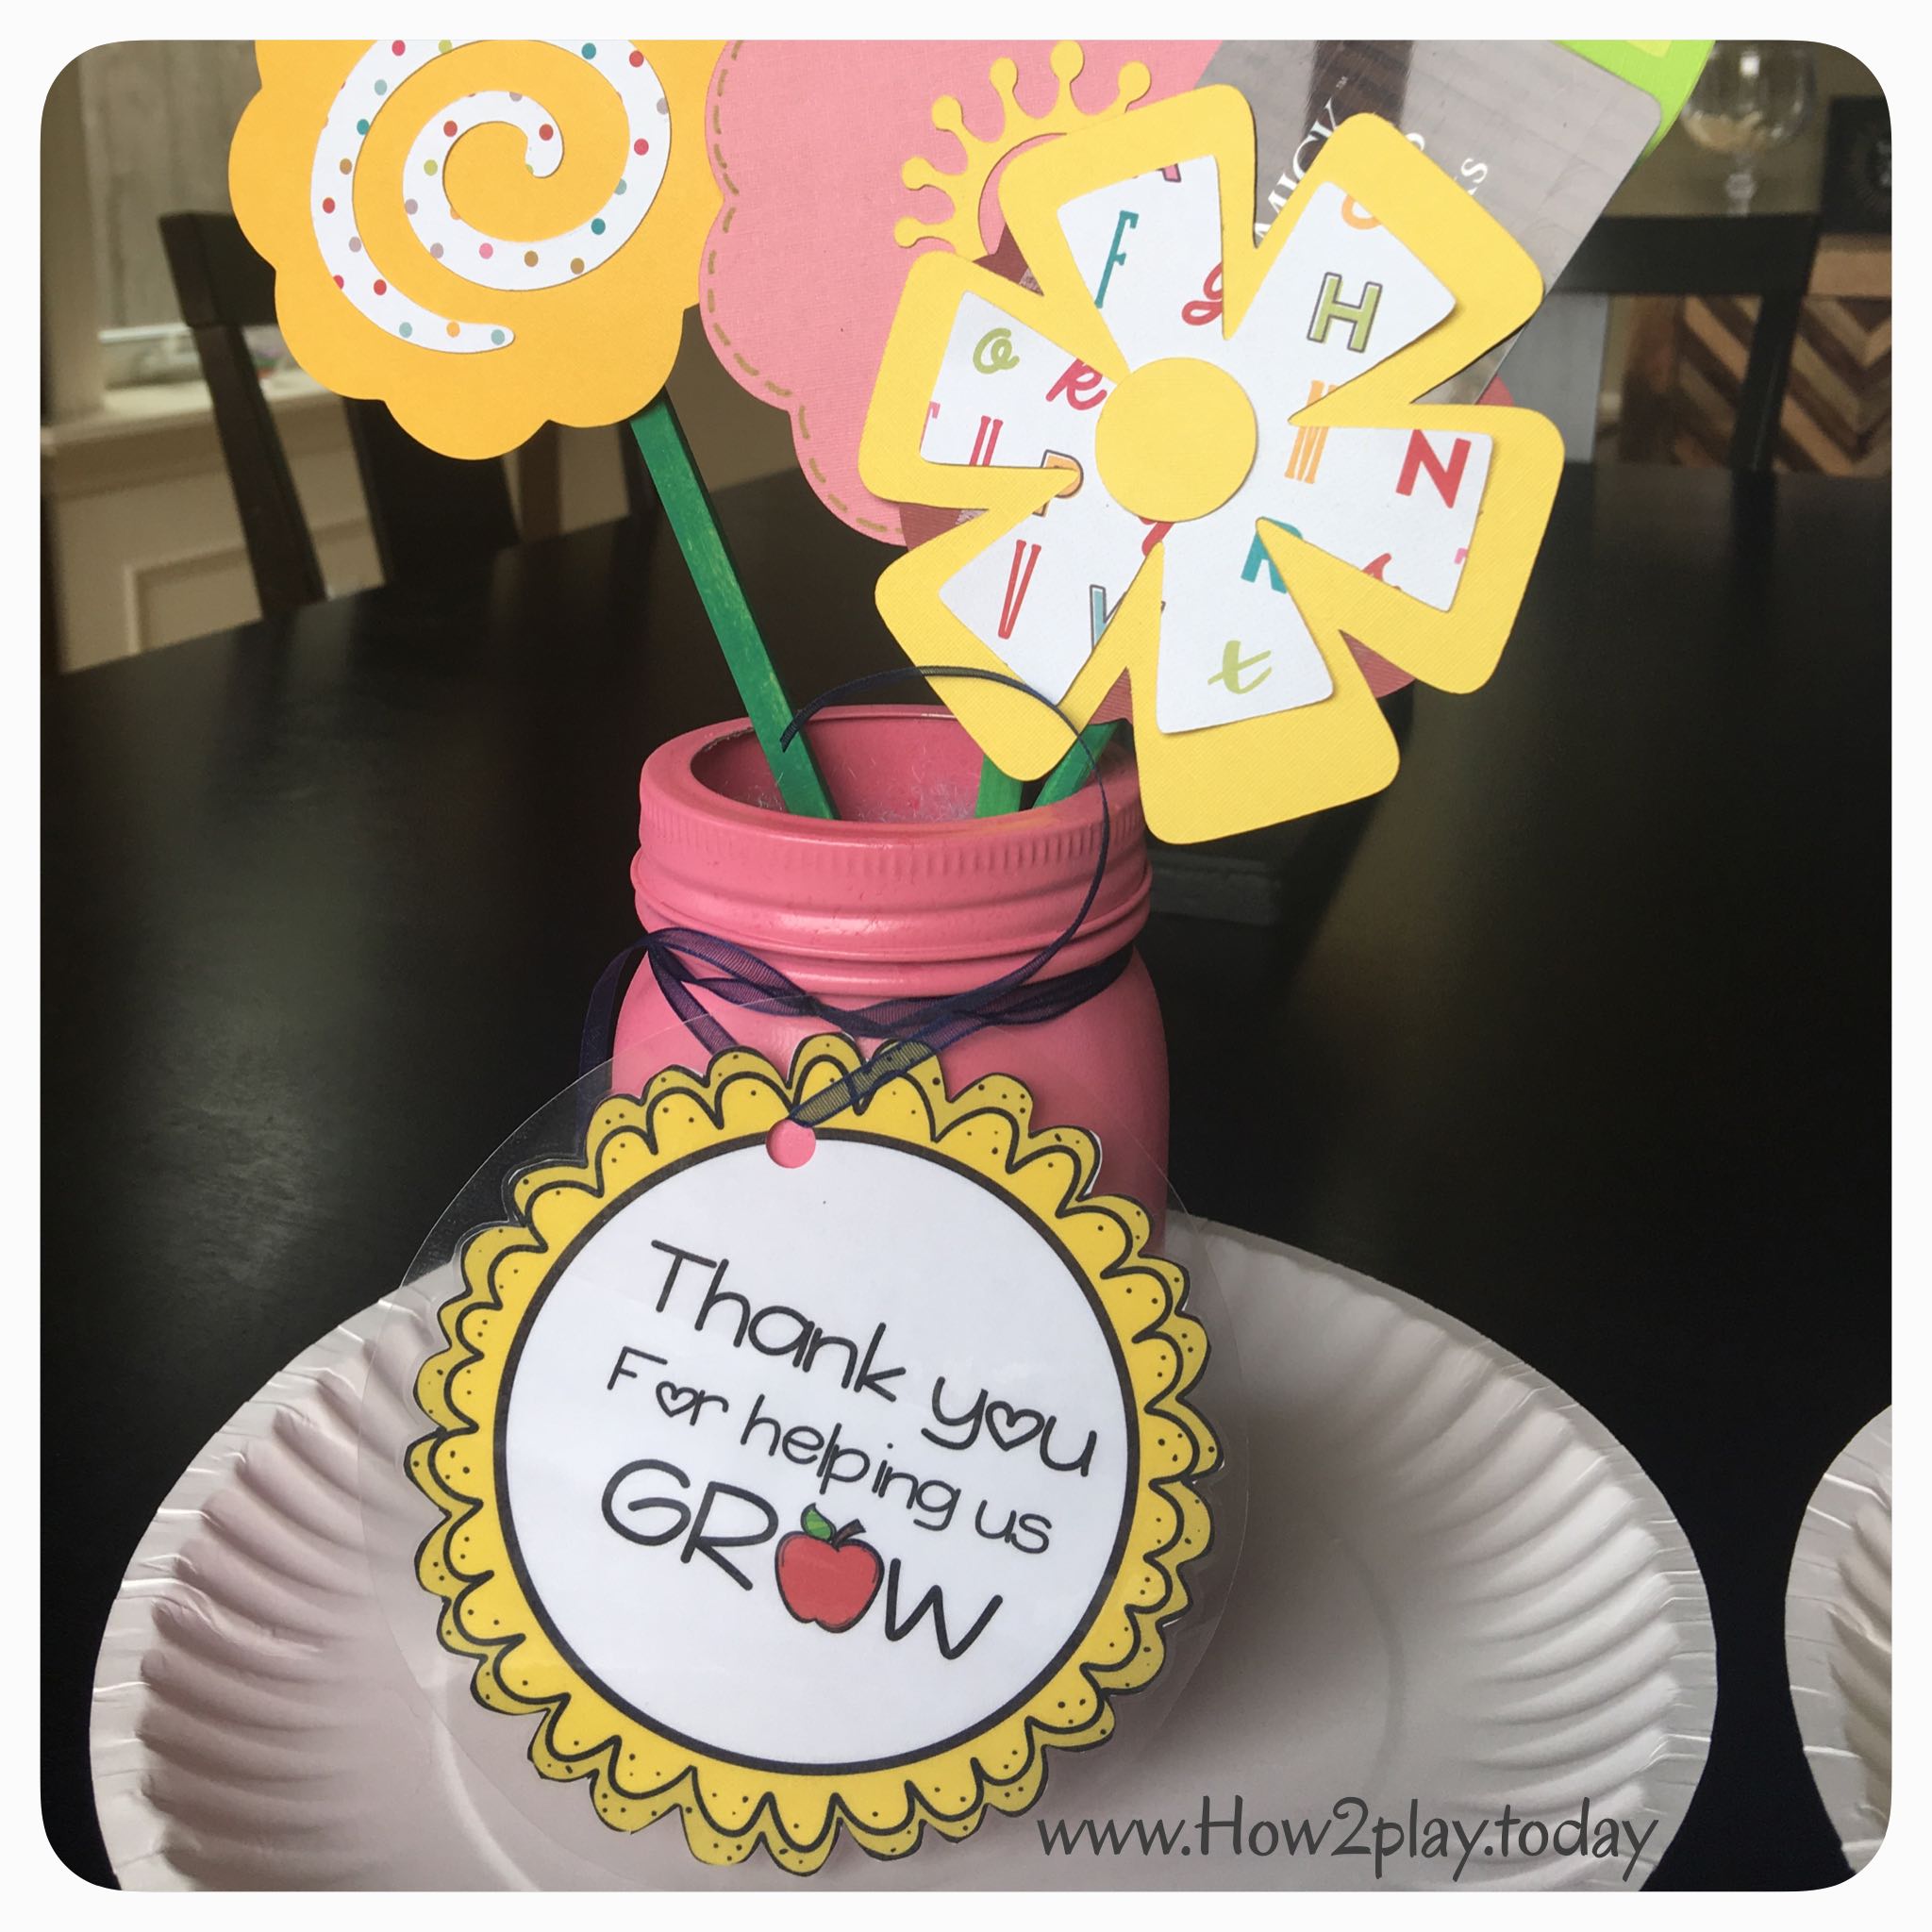 Teacher Appreciation Gifts: Thanks for Helping us Grow!